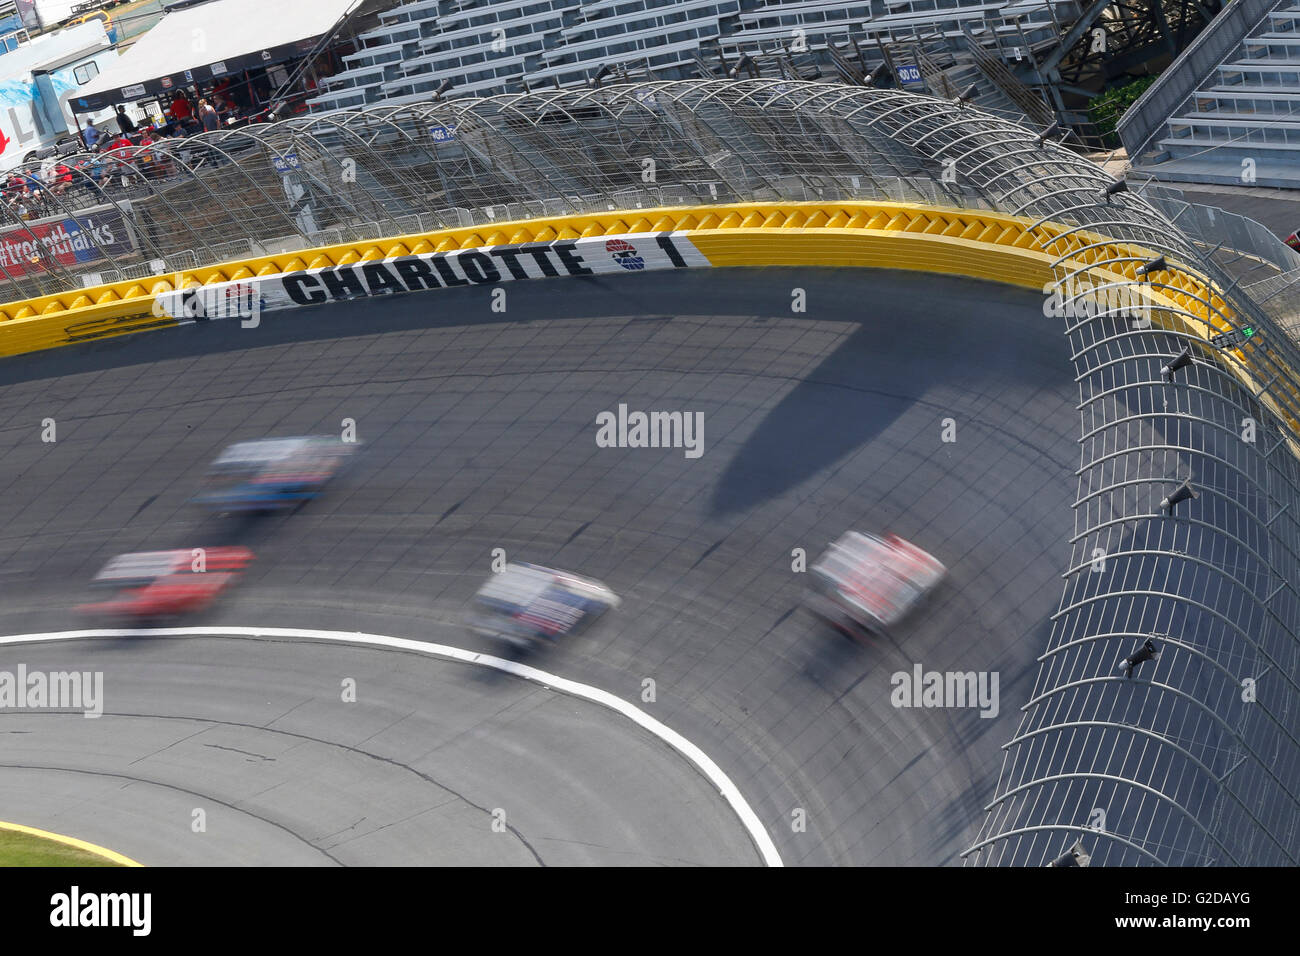 Concord, NC, USA. 28th May, 2016. Concord, NC - May 28, 2016: Darrell Wallace Jr (6) battles for position during the Hisense 300 at the Charlotte Motor Speedway in Concord, NC. © csm/Alamy Live News Stock Photo